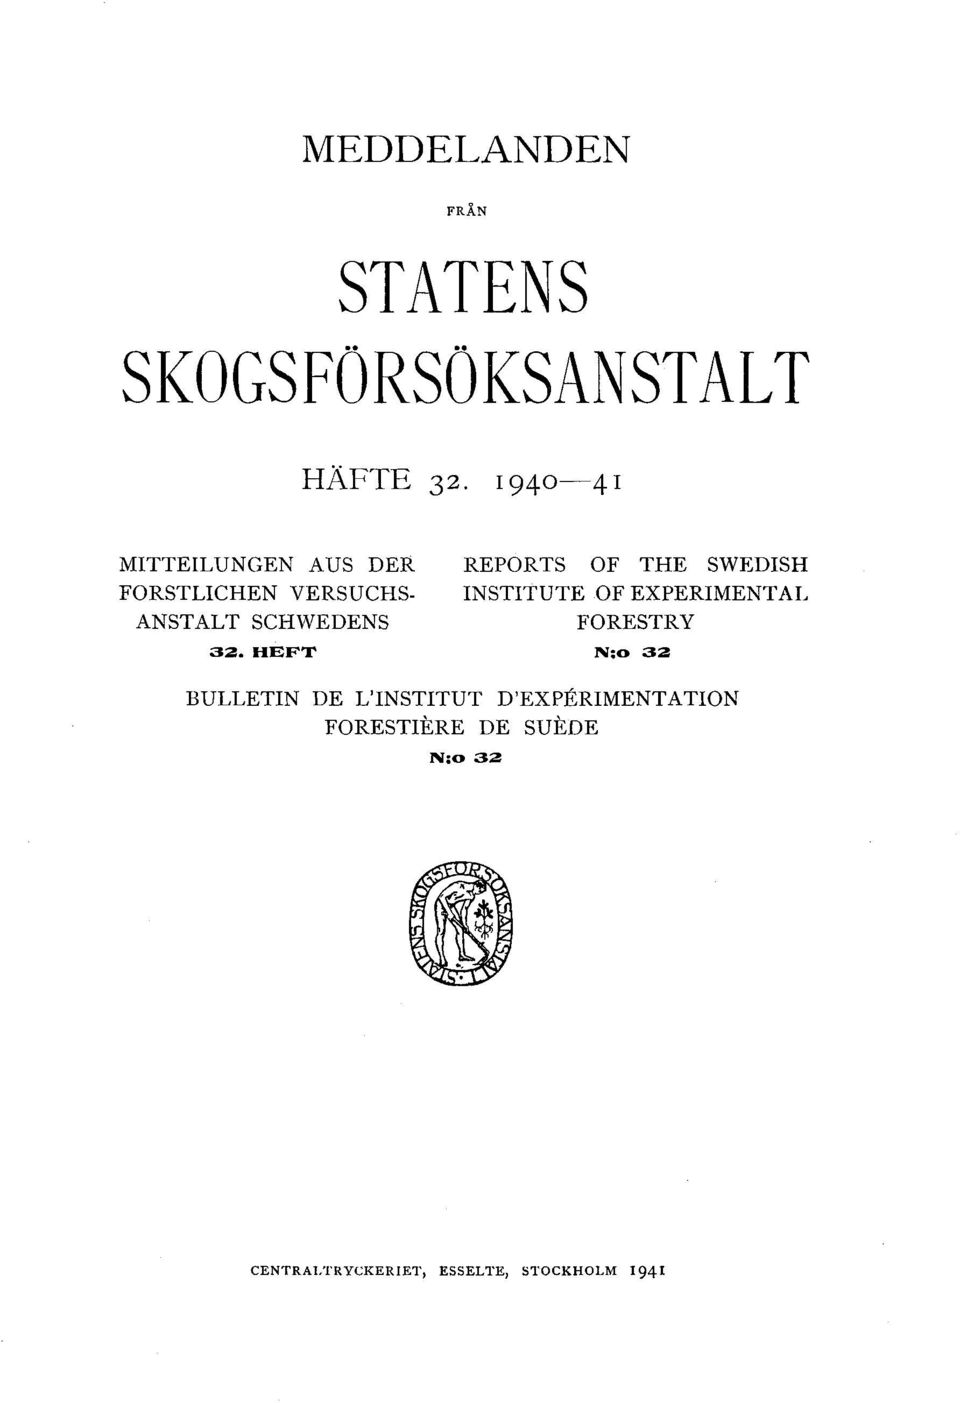 HEFT REPORTS OF THE SWEDISH INSTITUTE OF EXPERIMENT AL FORESTRY N;o 32